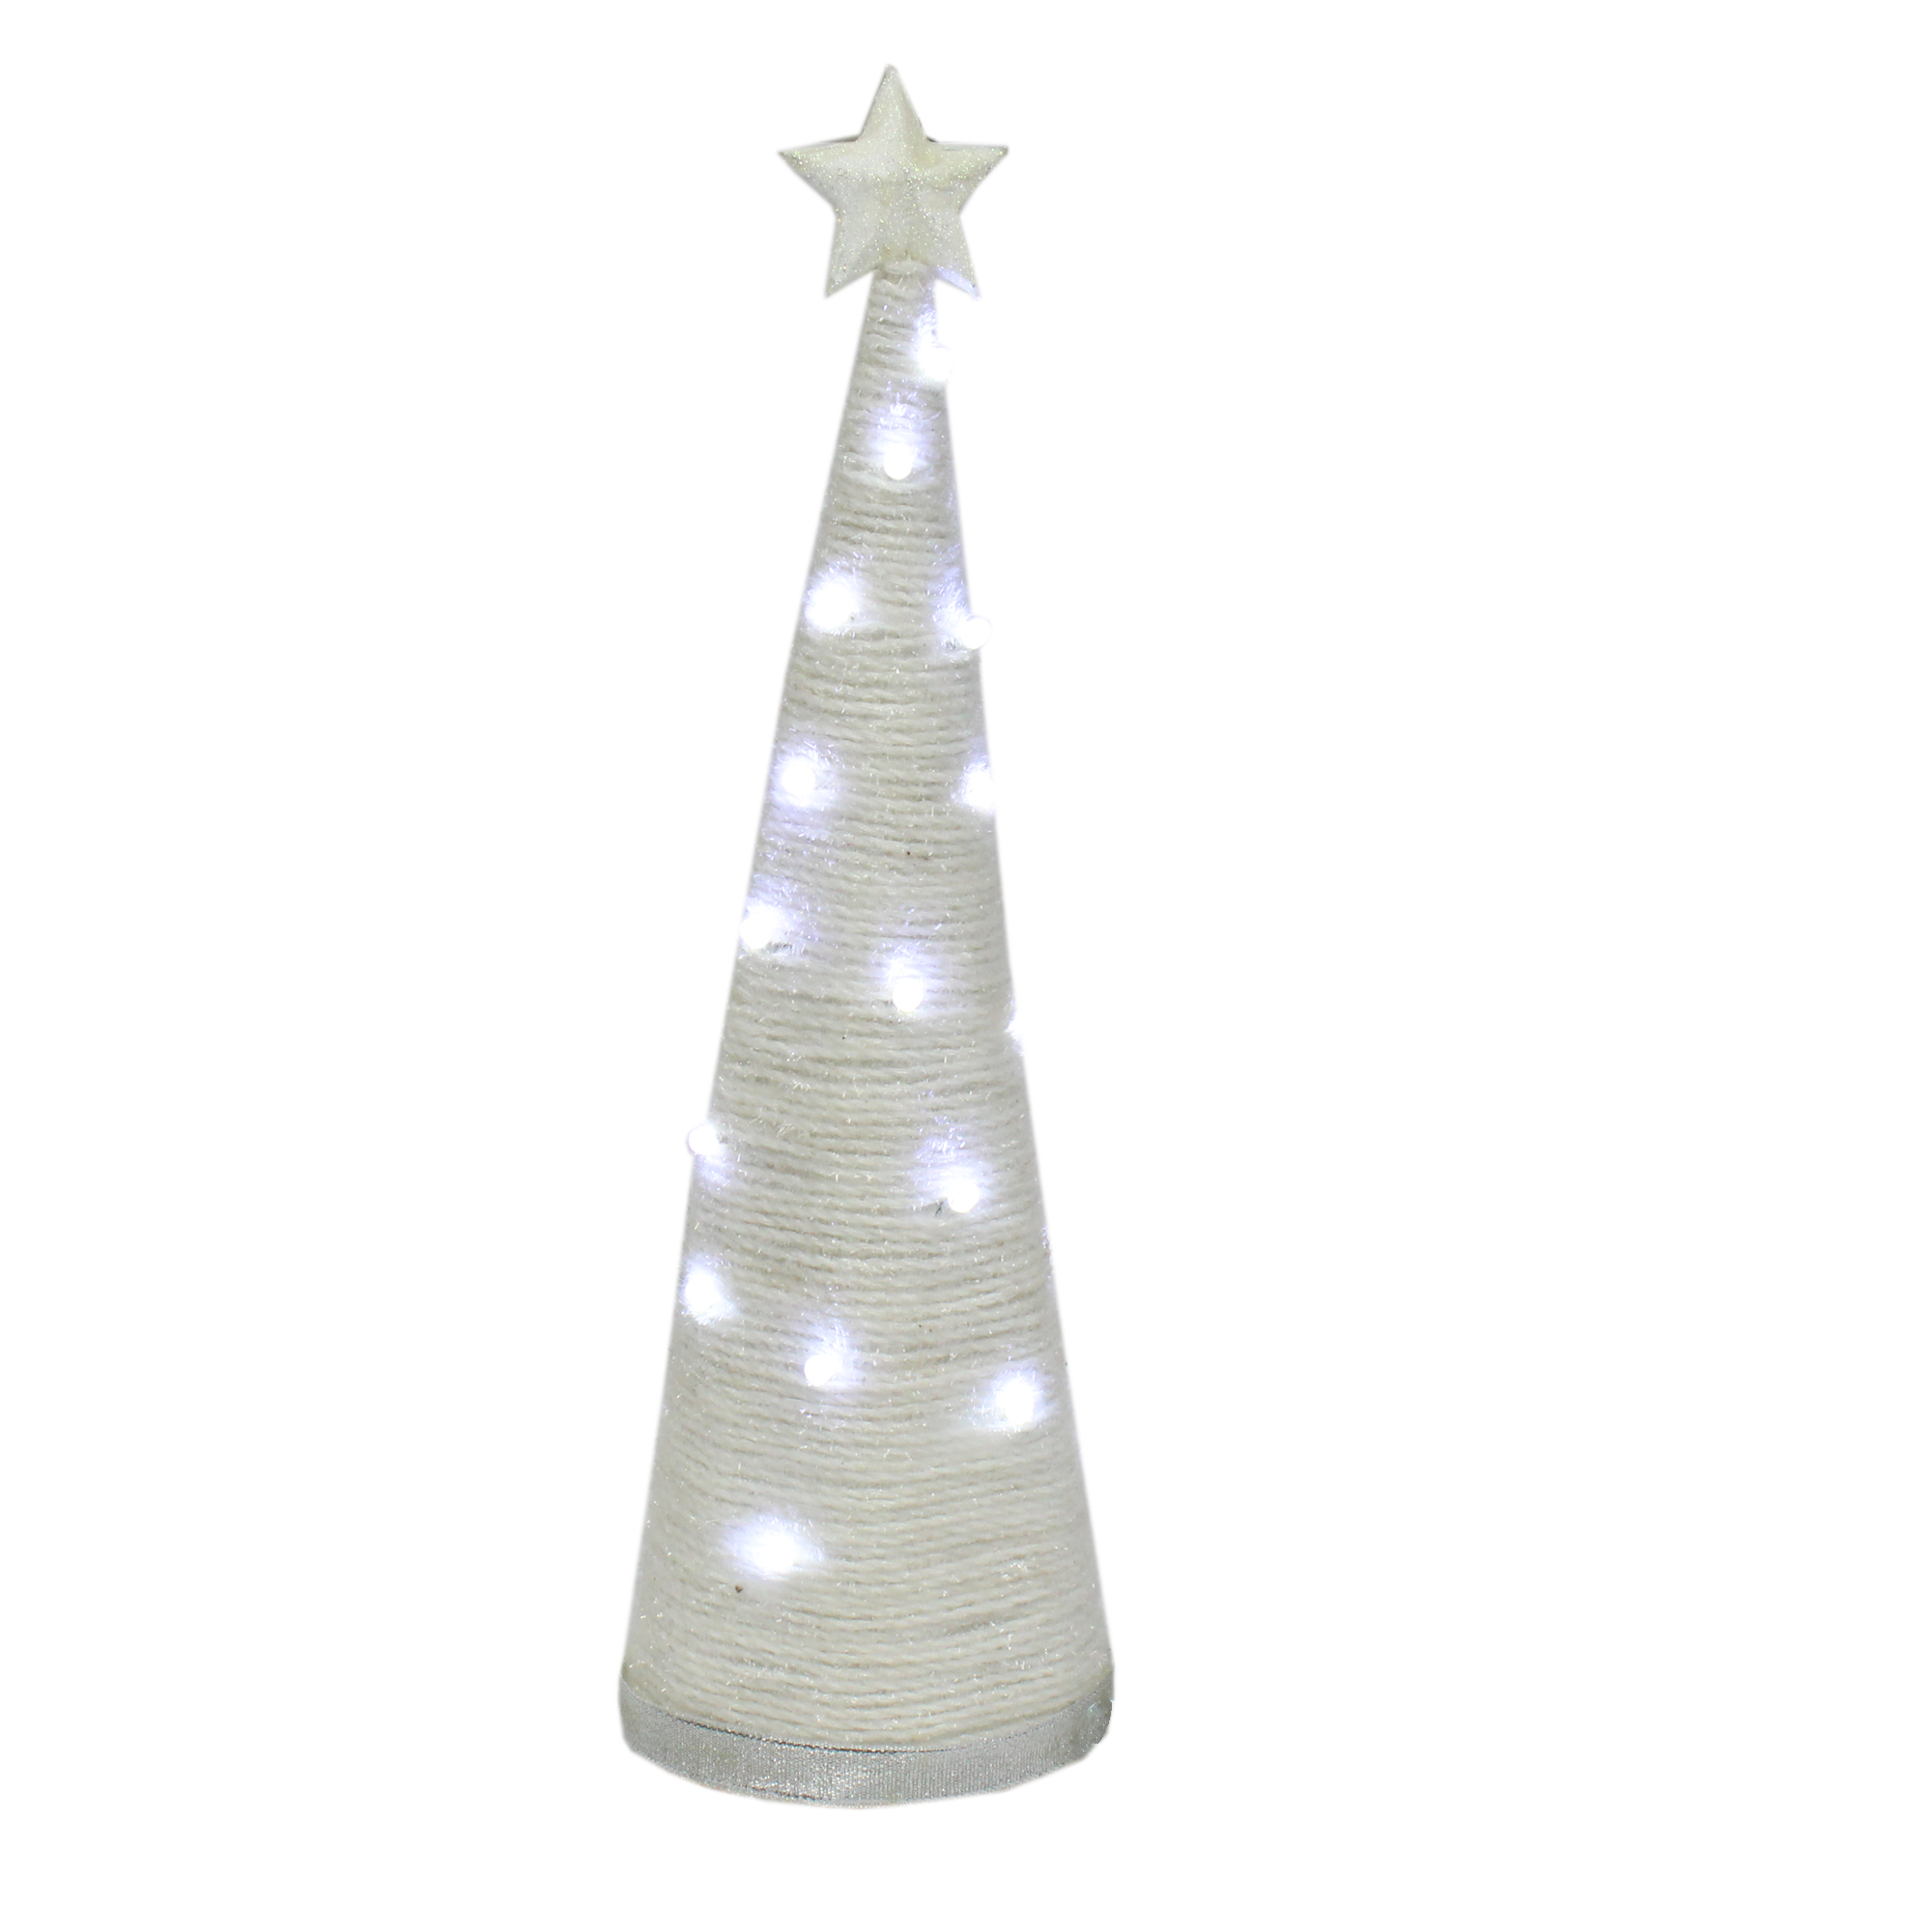 Handmade Conical Christmas Tinsel Tree with LED Light, 14.5 X 4inch, White, 1pc